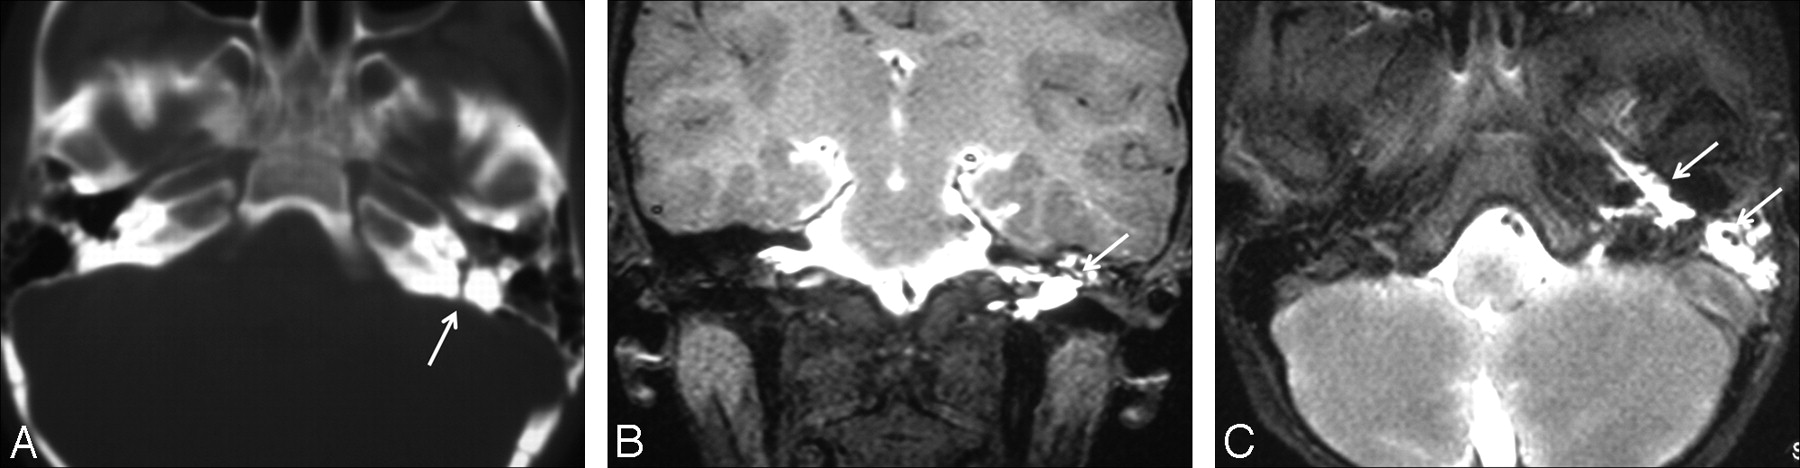 Intrathecal Gadolinium-Enhanced MR Cisternography in the Evaluation of ...